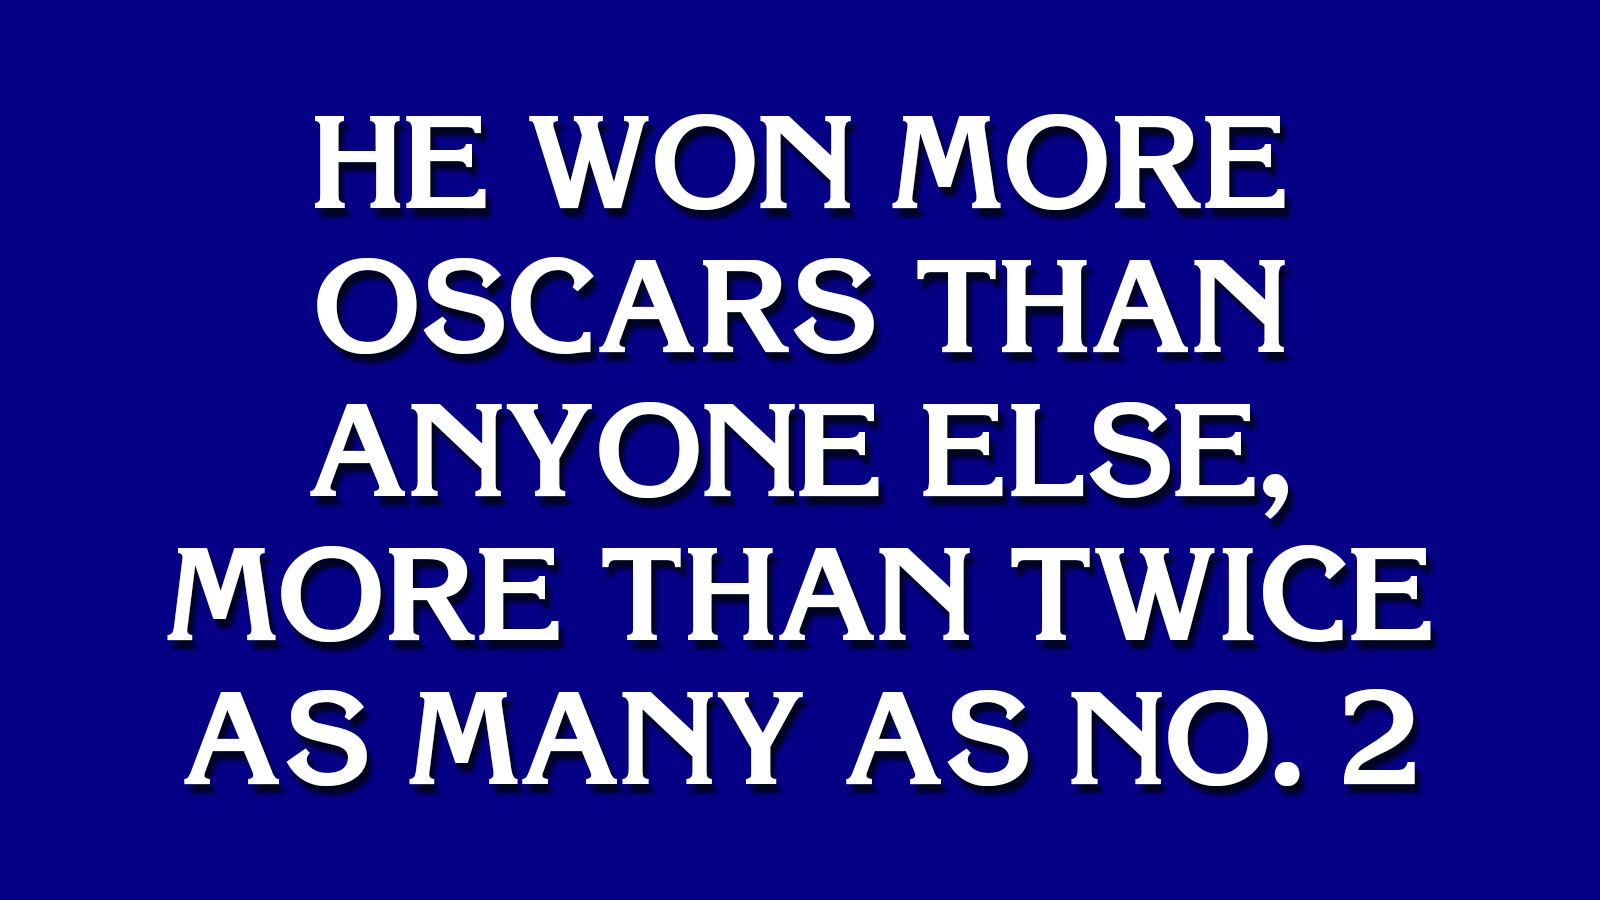 Can You Go on “Jeopardy!”? 73